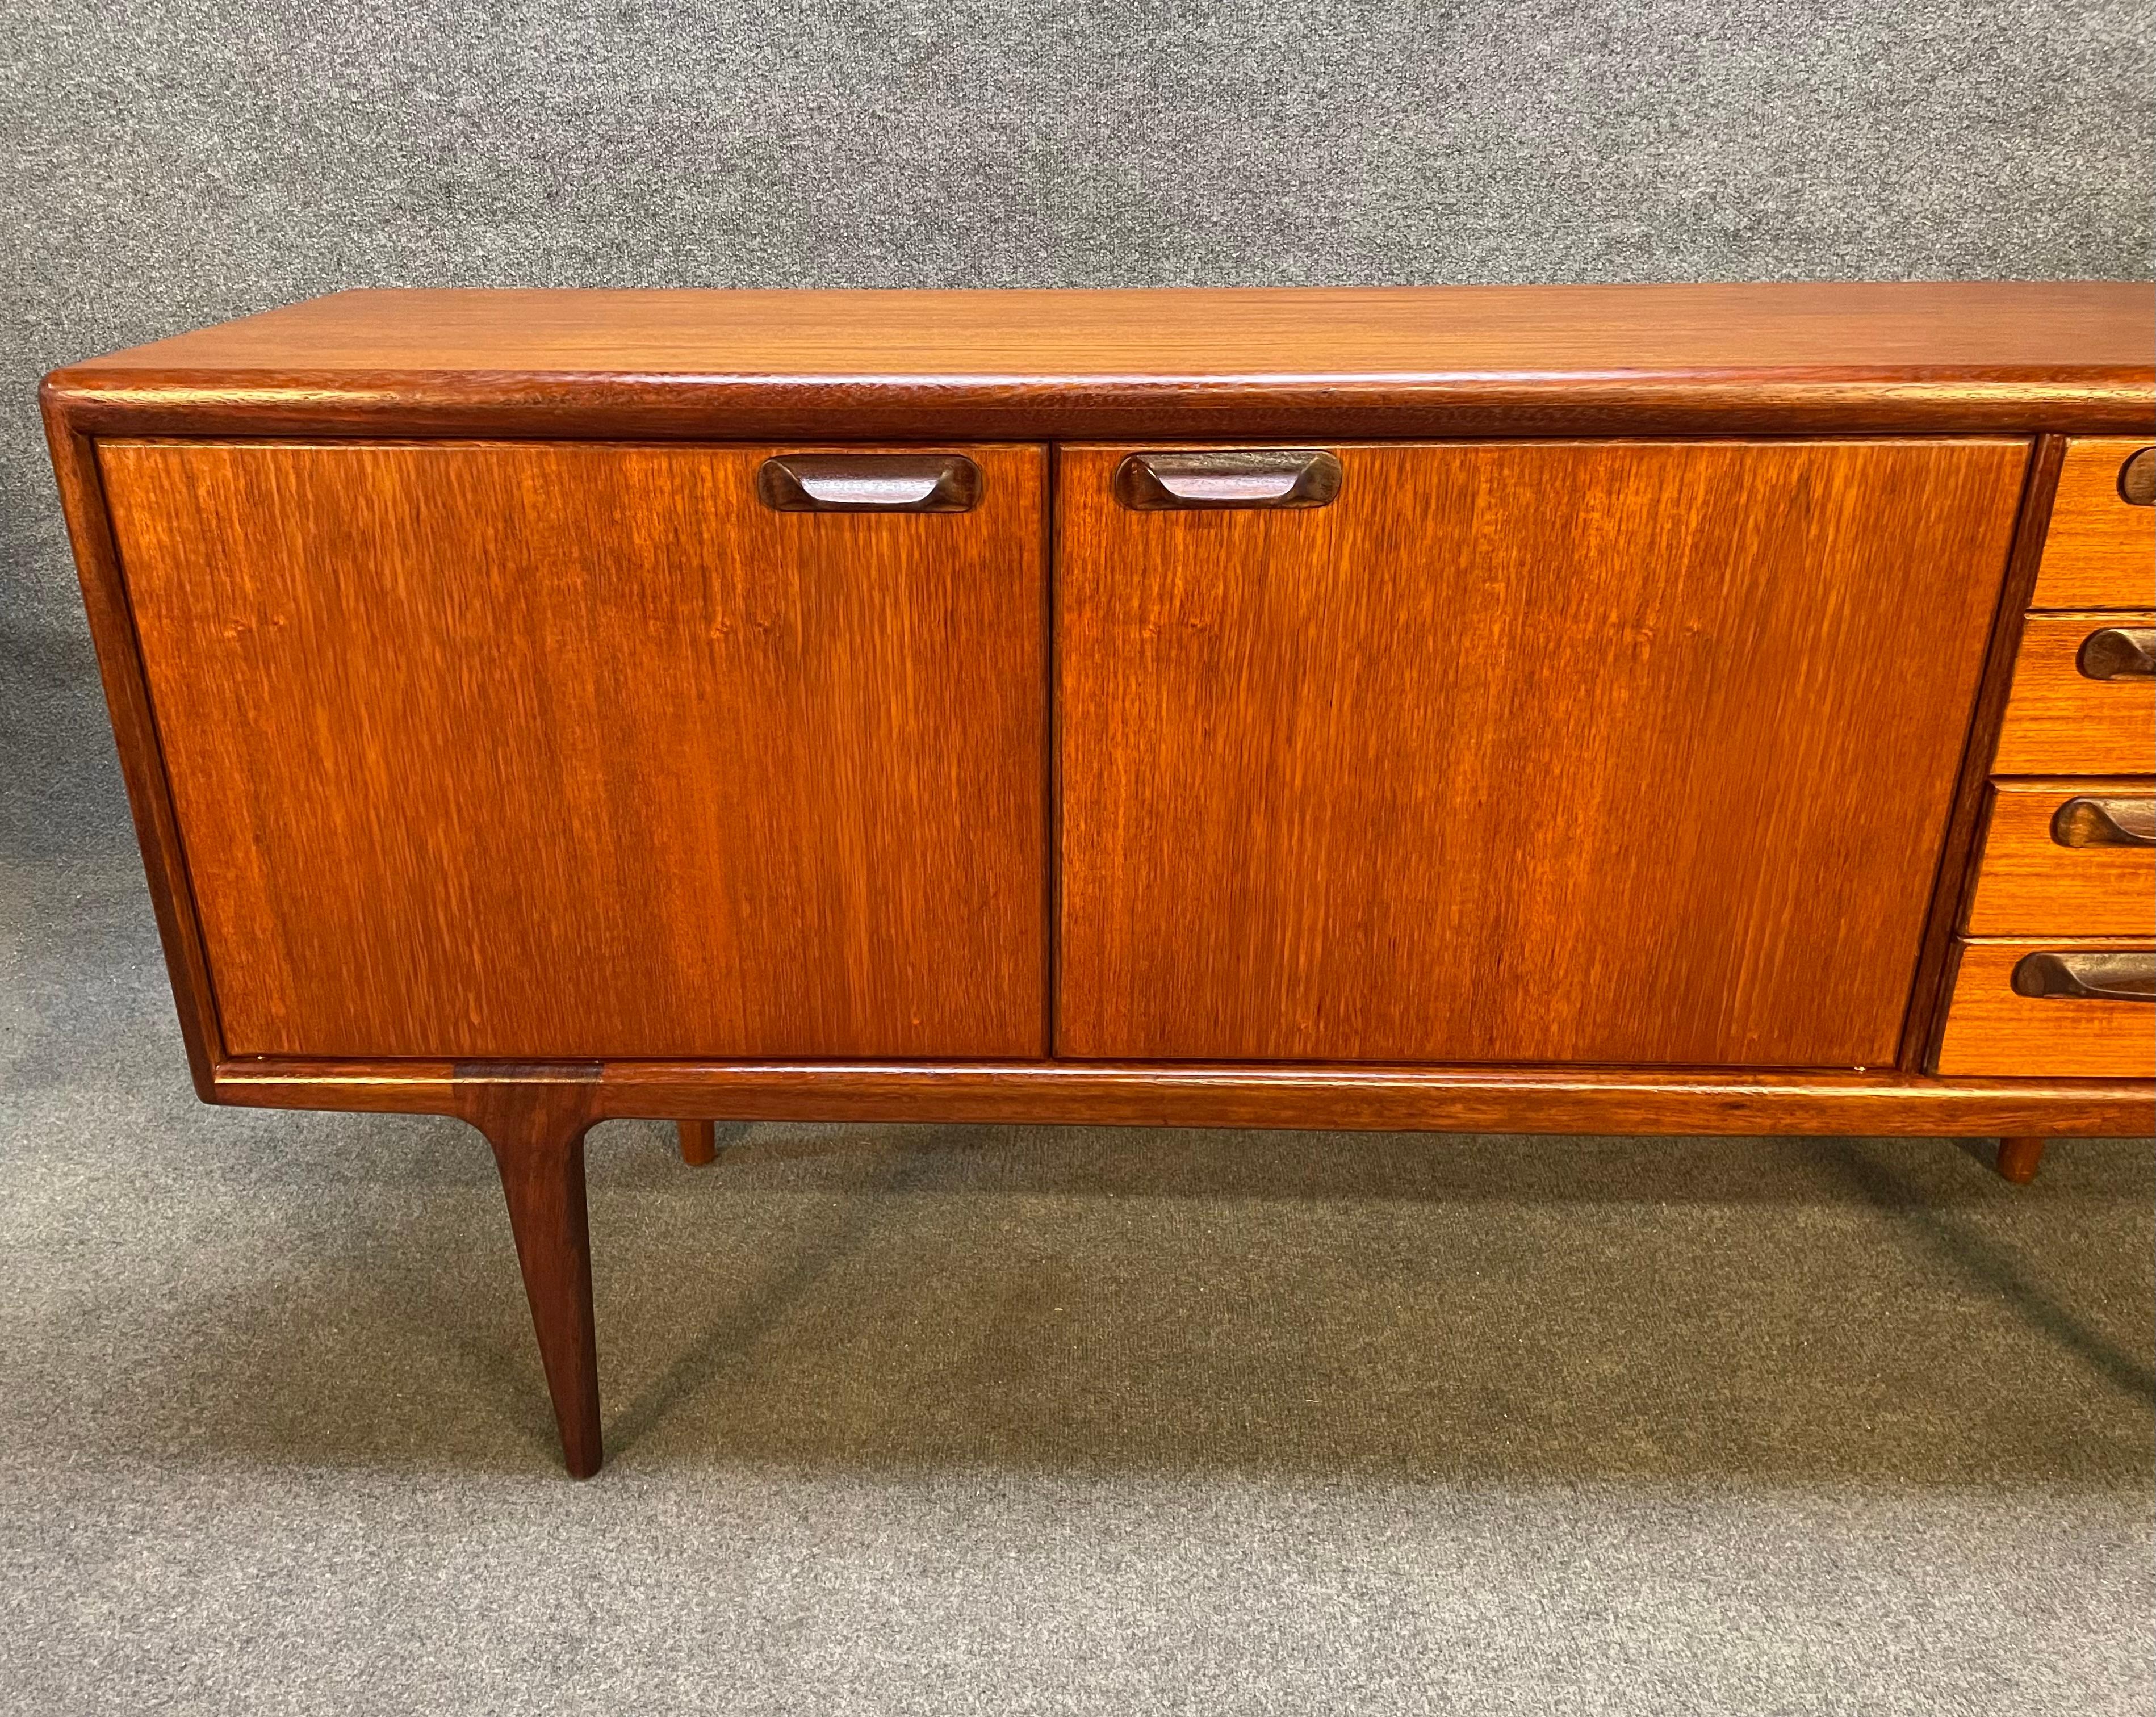 Here is a beautiful MCM modern compact sideboard in teak part of the 